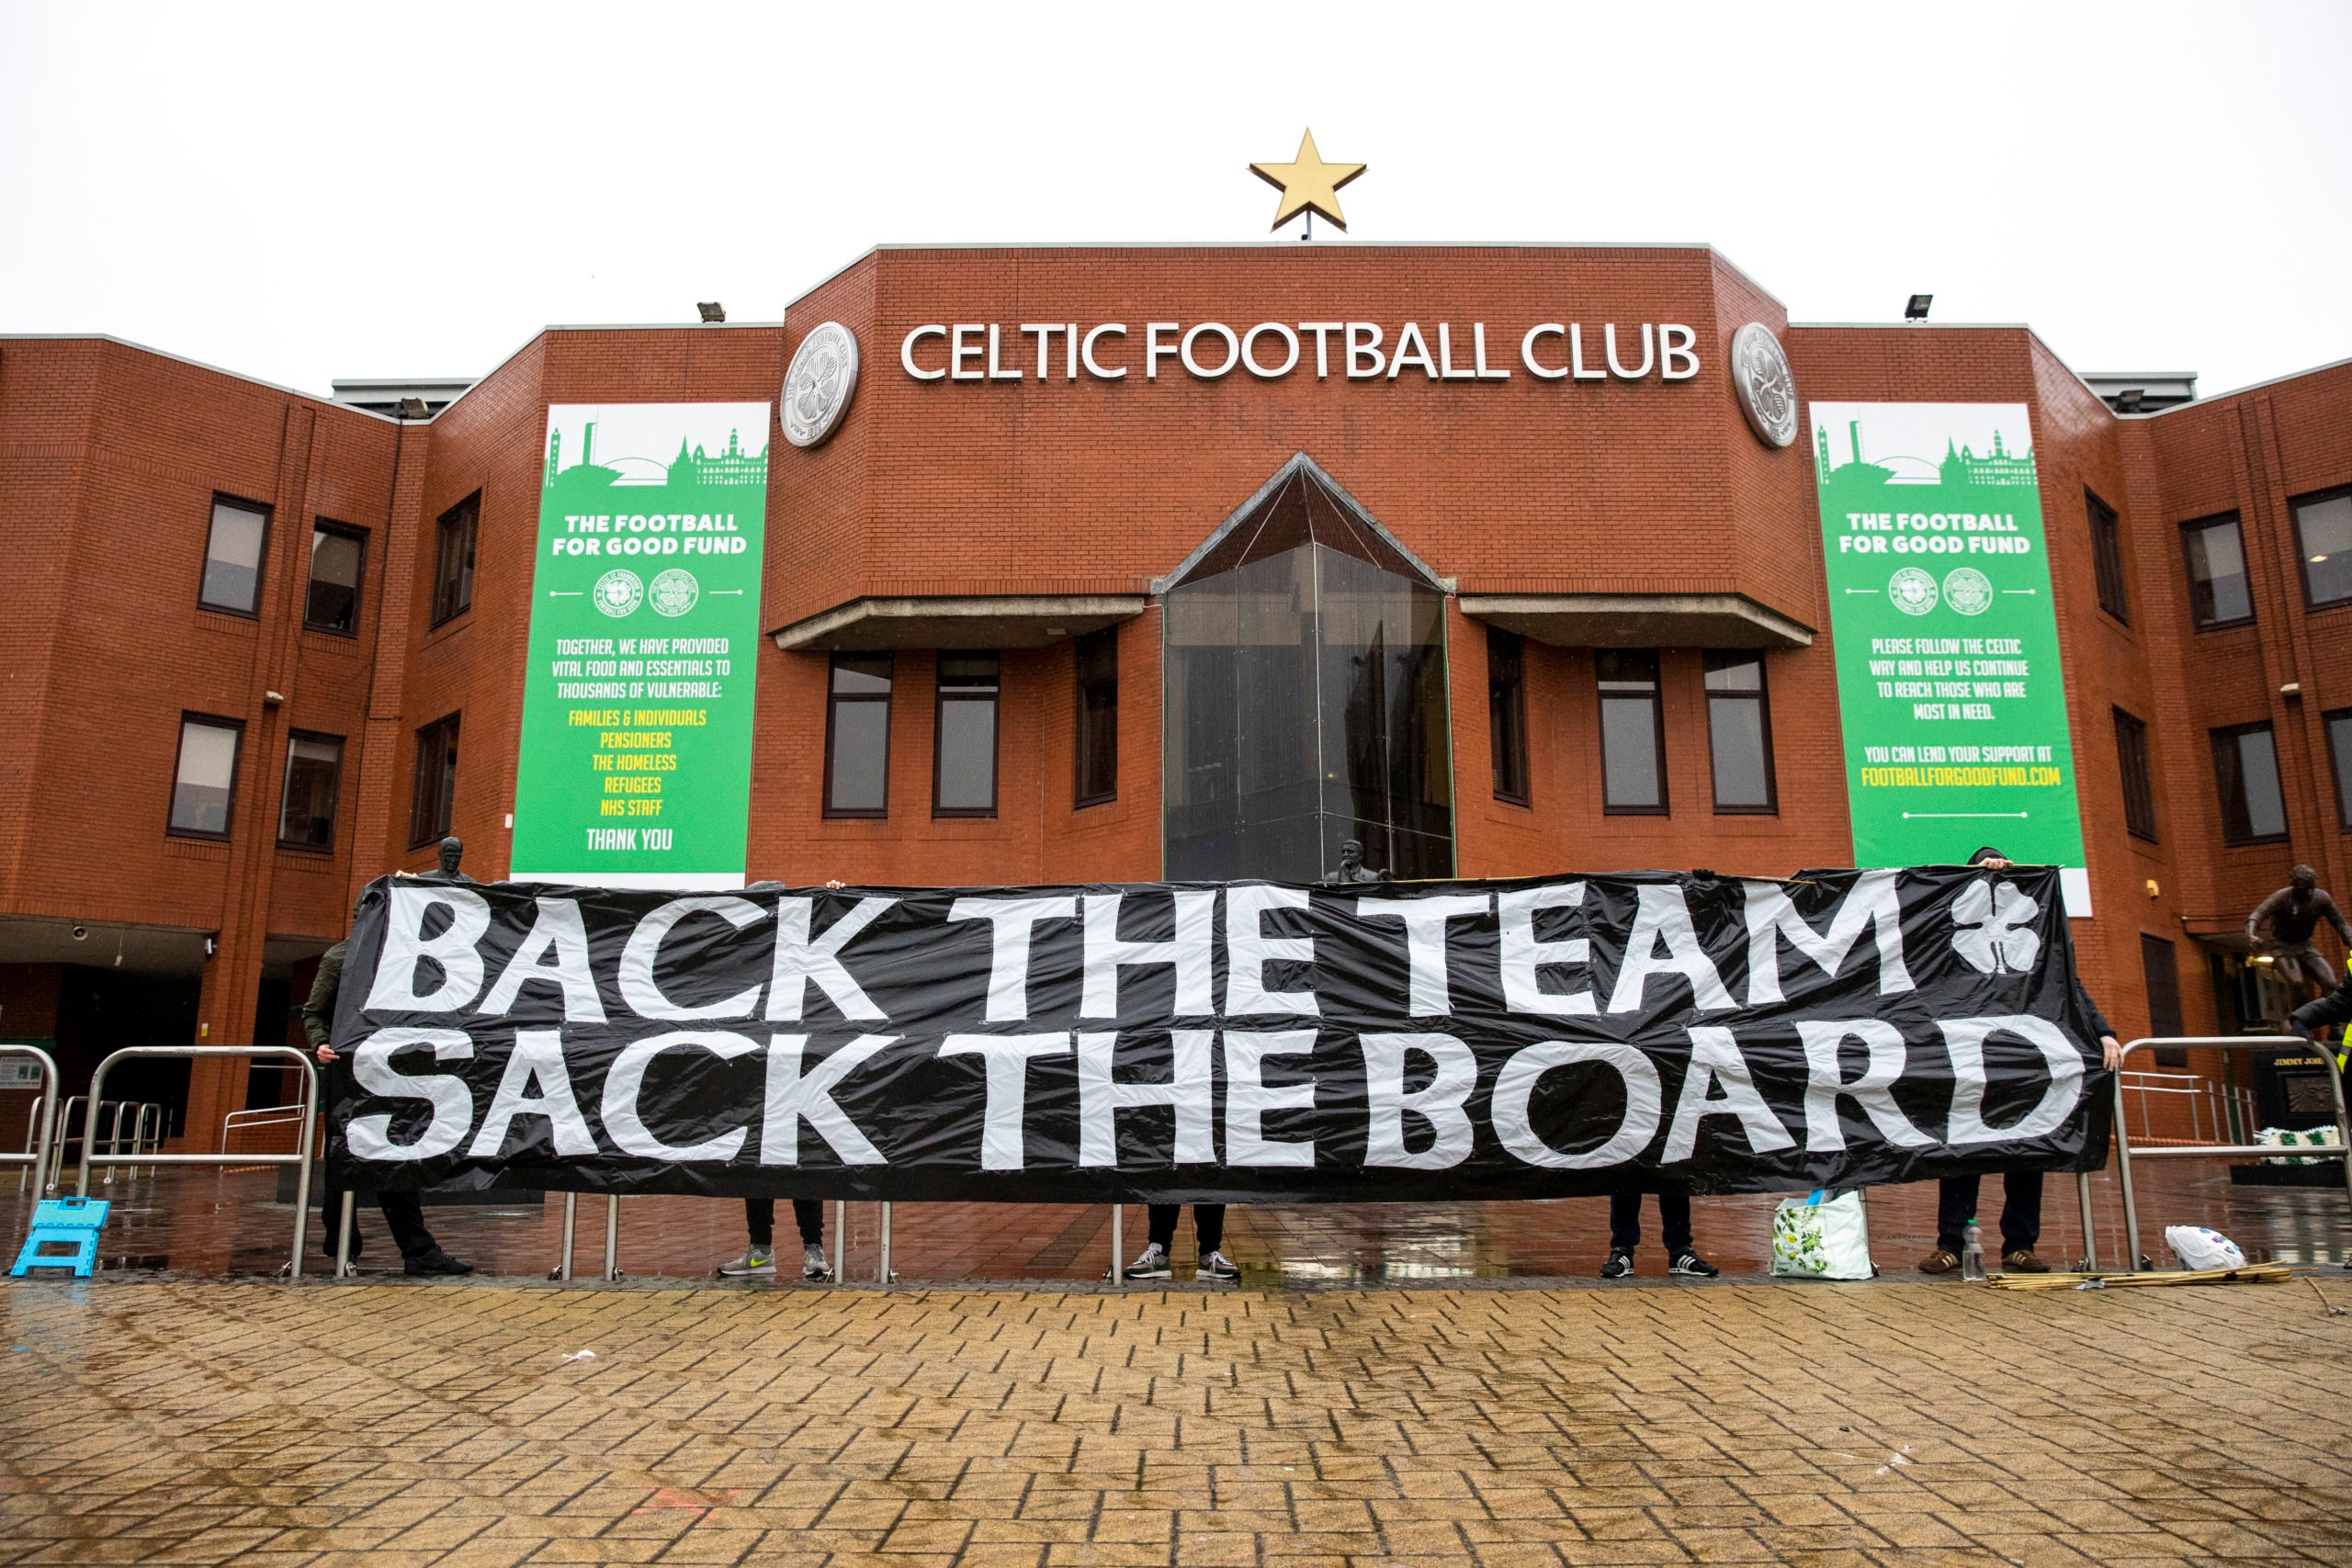 Exclusive: Celtic Trust membership "rising daily" amidst club crisis